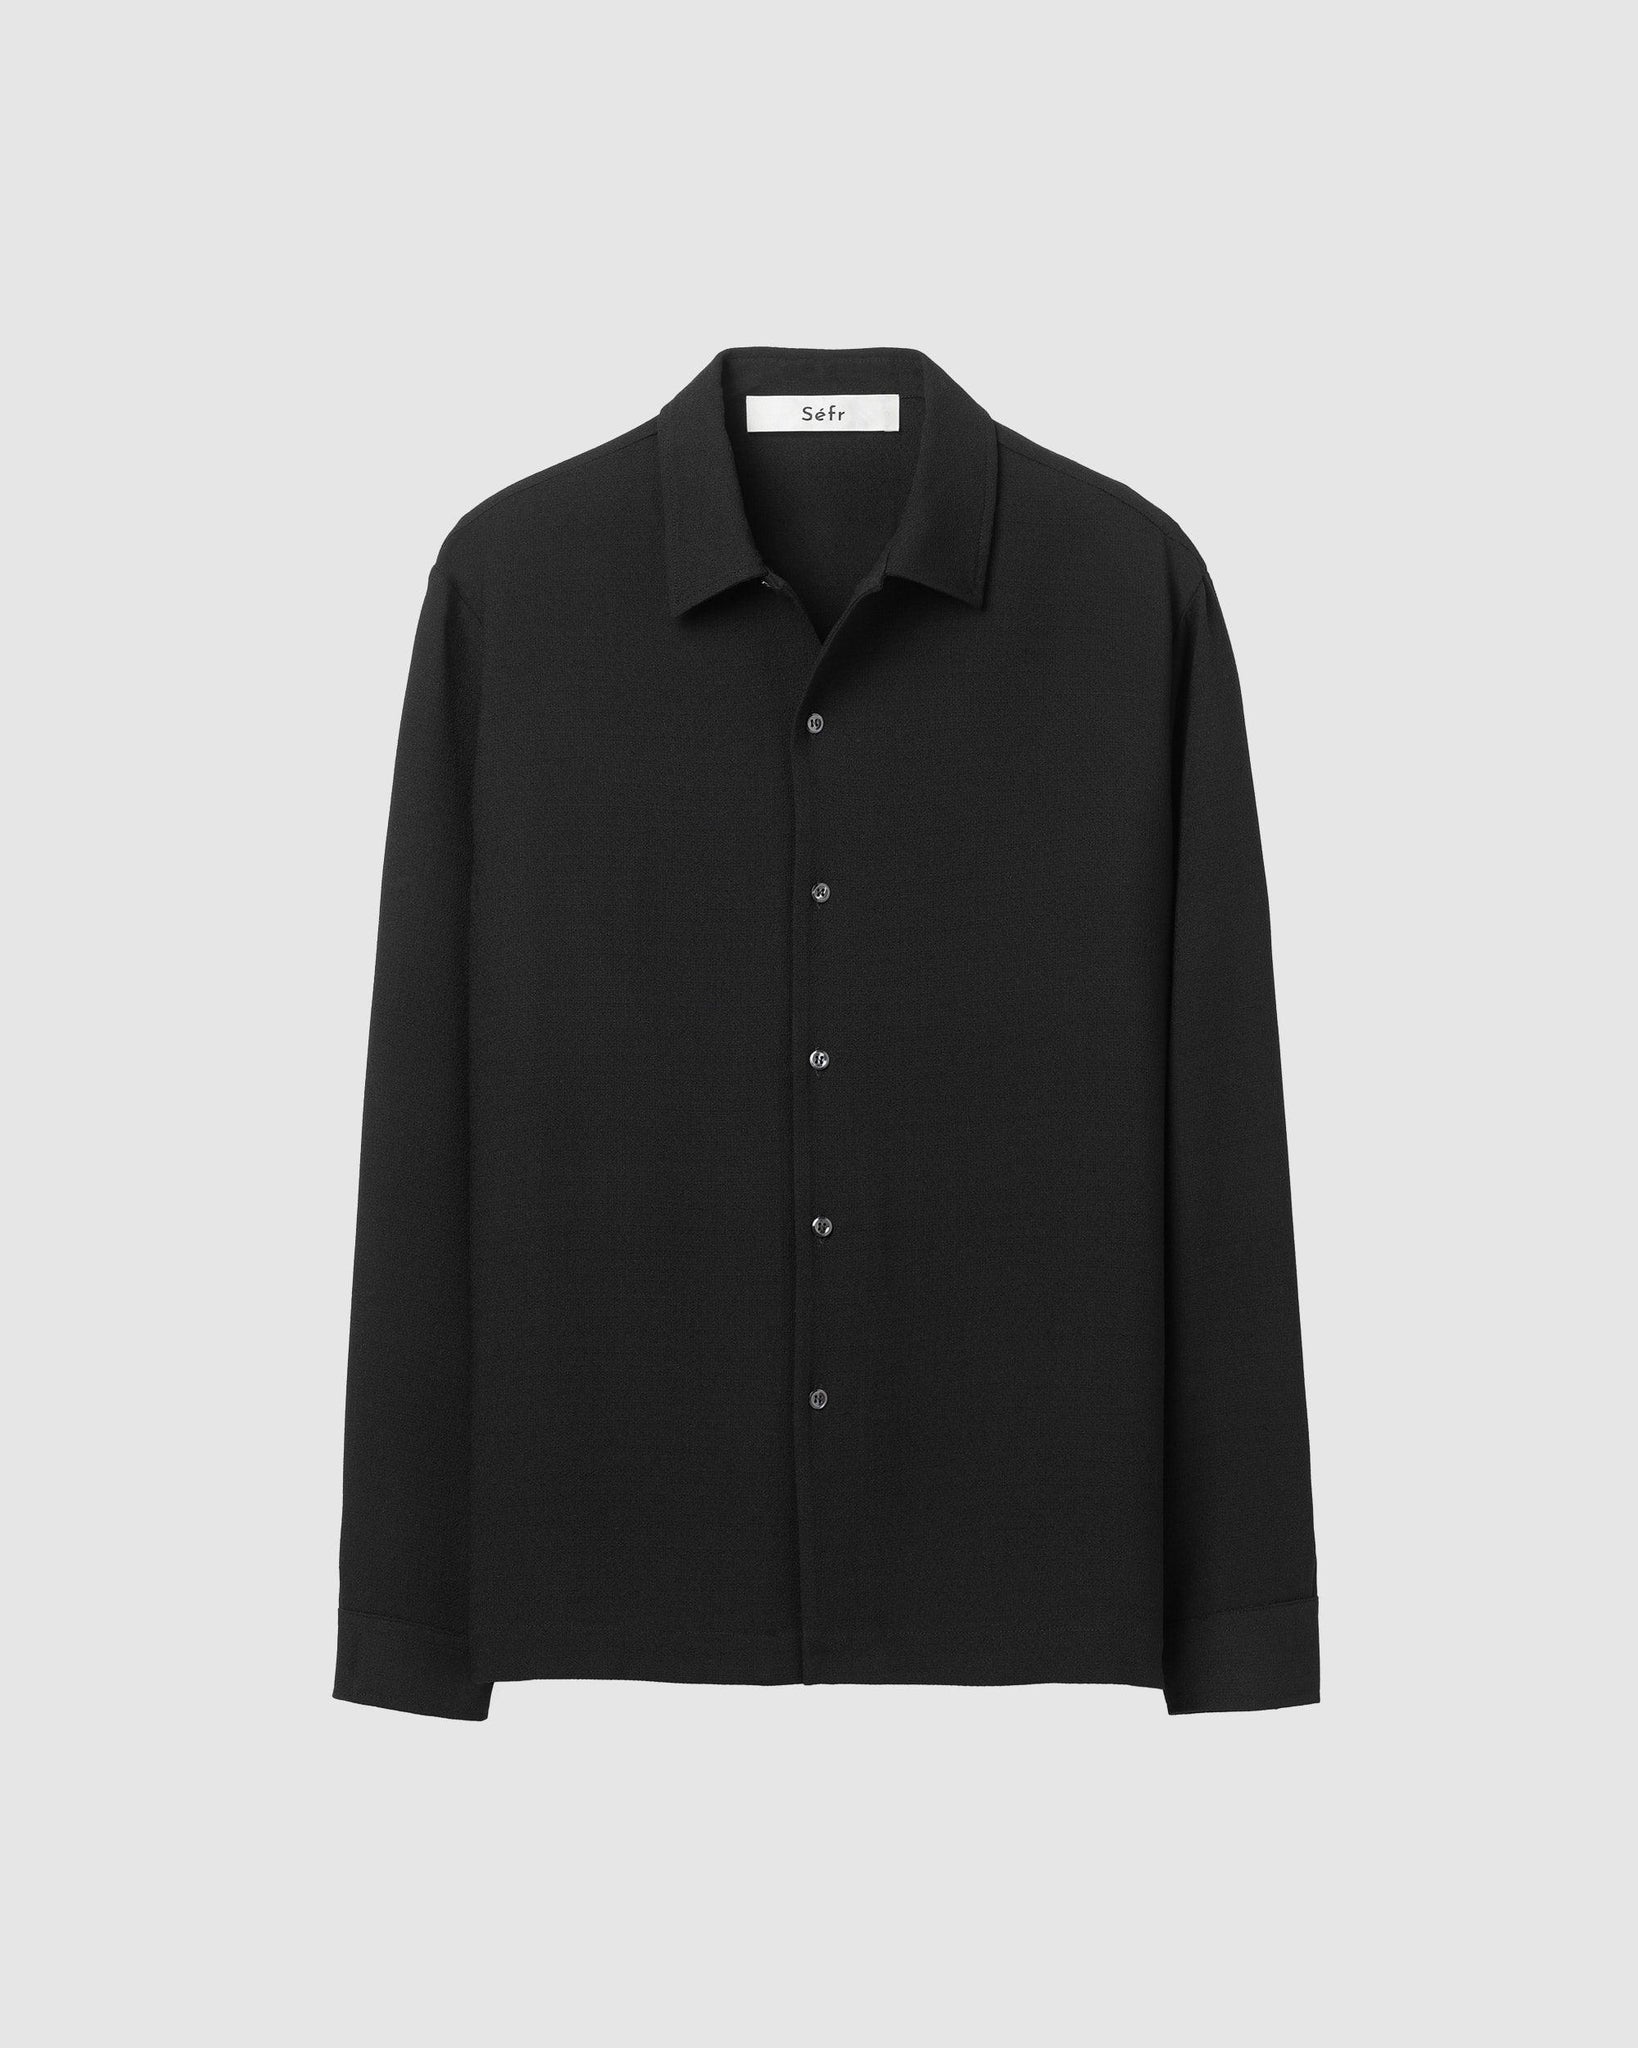 Sense Shirt Black Crepe - {{ collection.title }} - Chinatown Country Club 